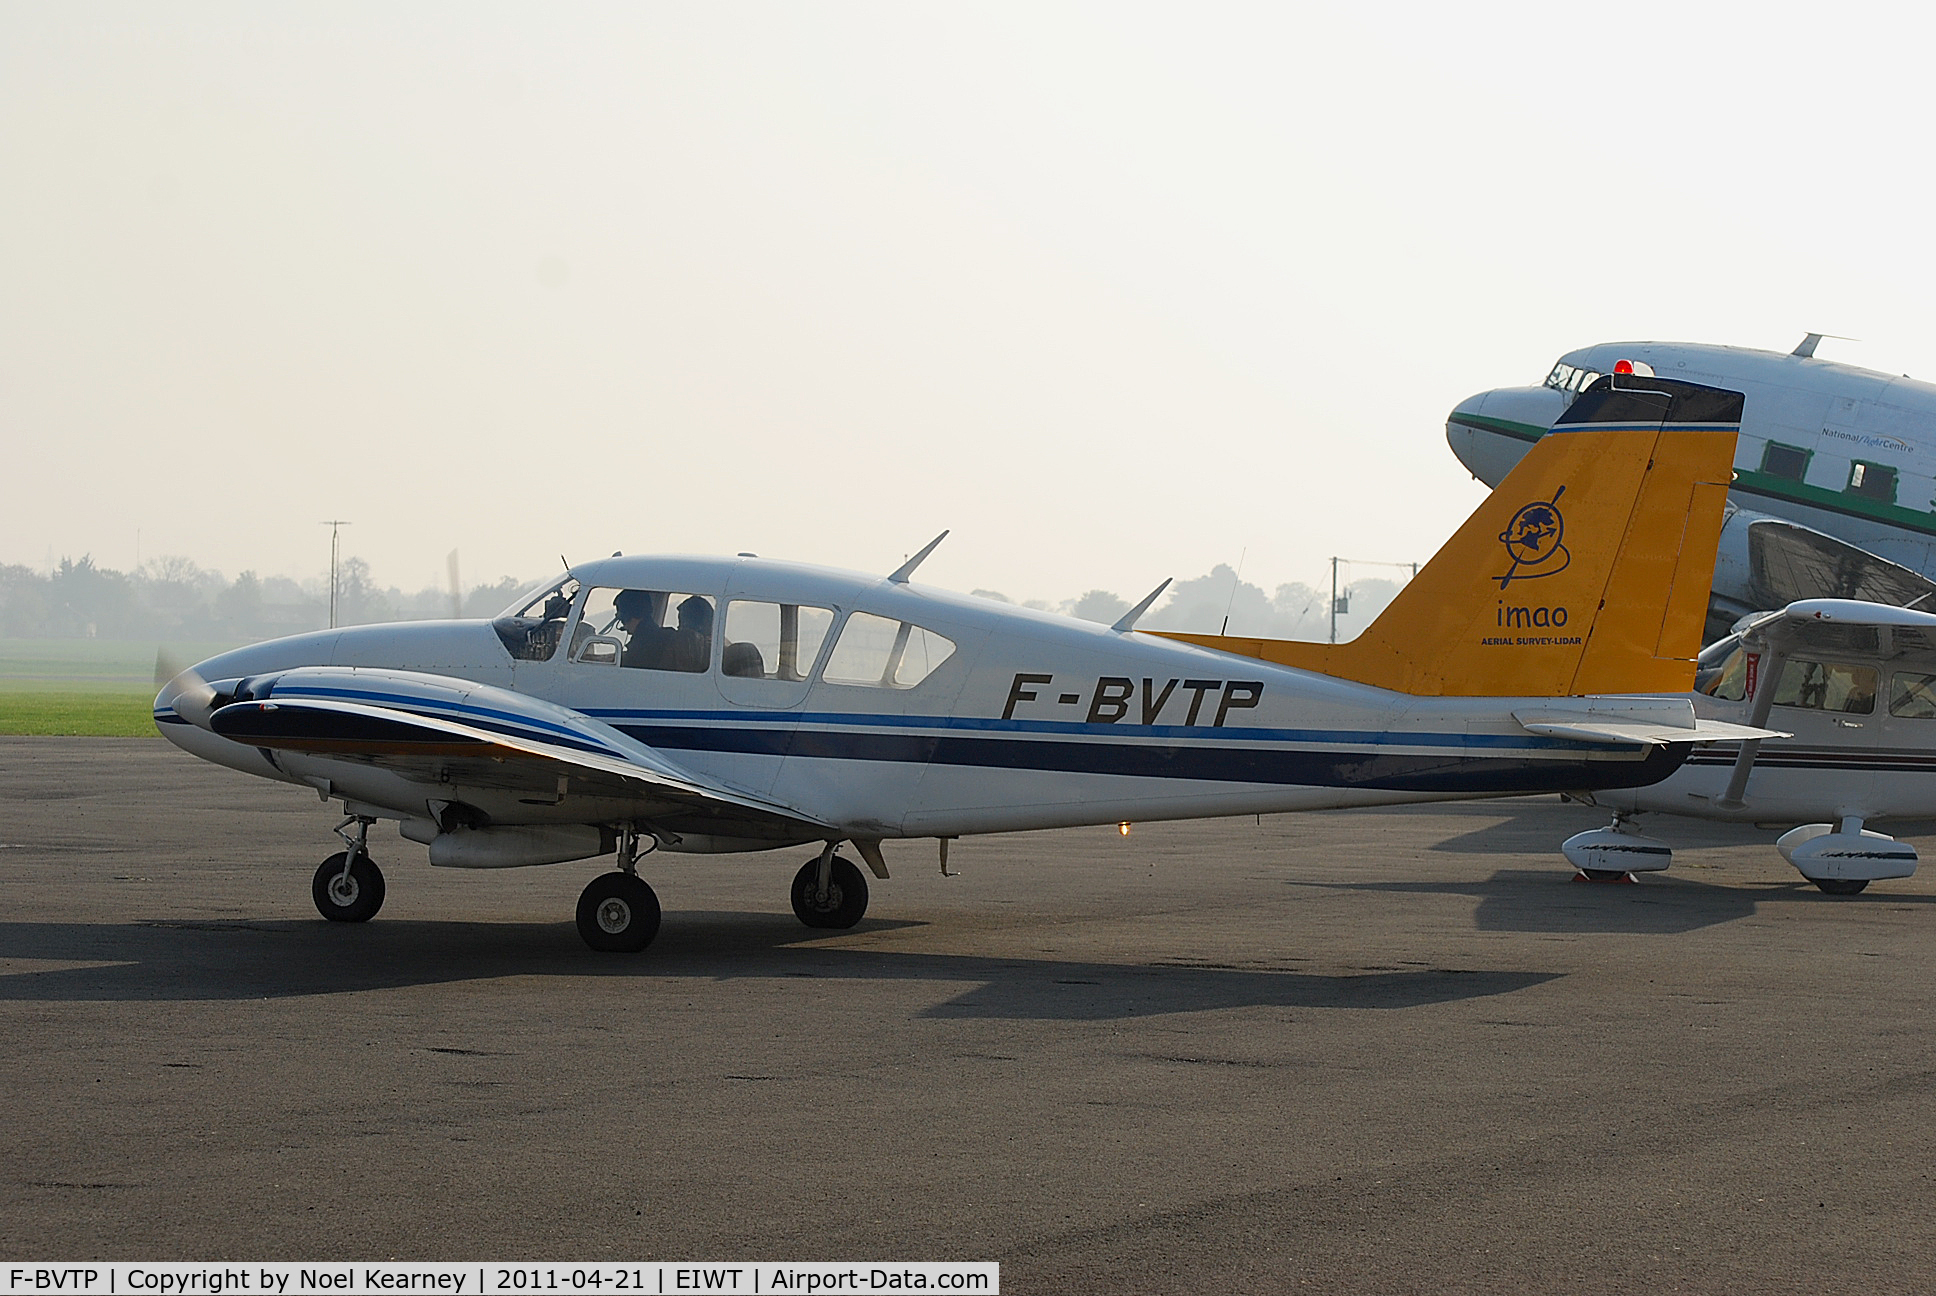 F-BVTP, Piper PA-23-250 Aztec C/N 273901, Just about to depart from Weston...